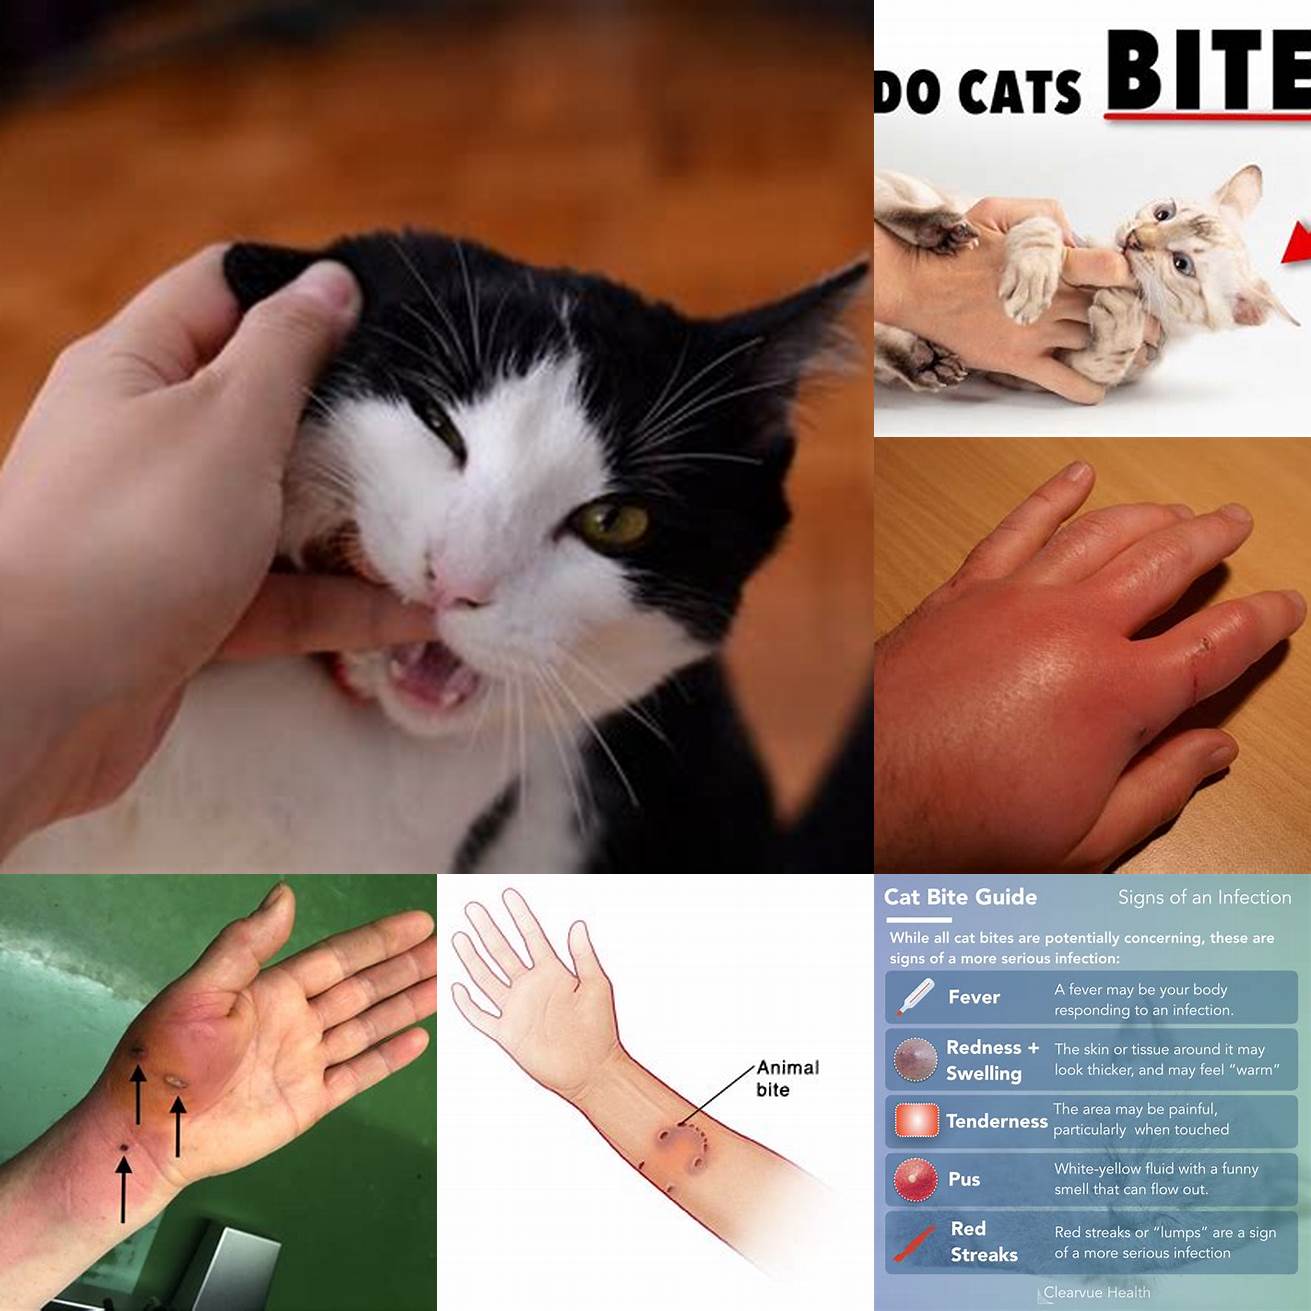 A real bite can happen at any time especially if the cat is feeling threatened or in pain